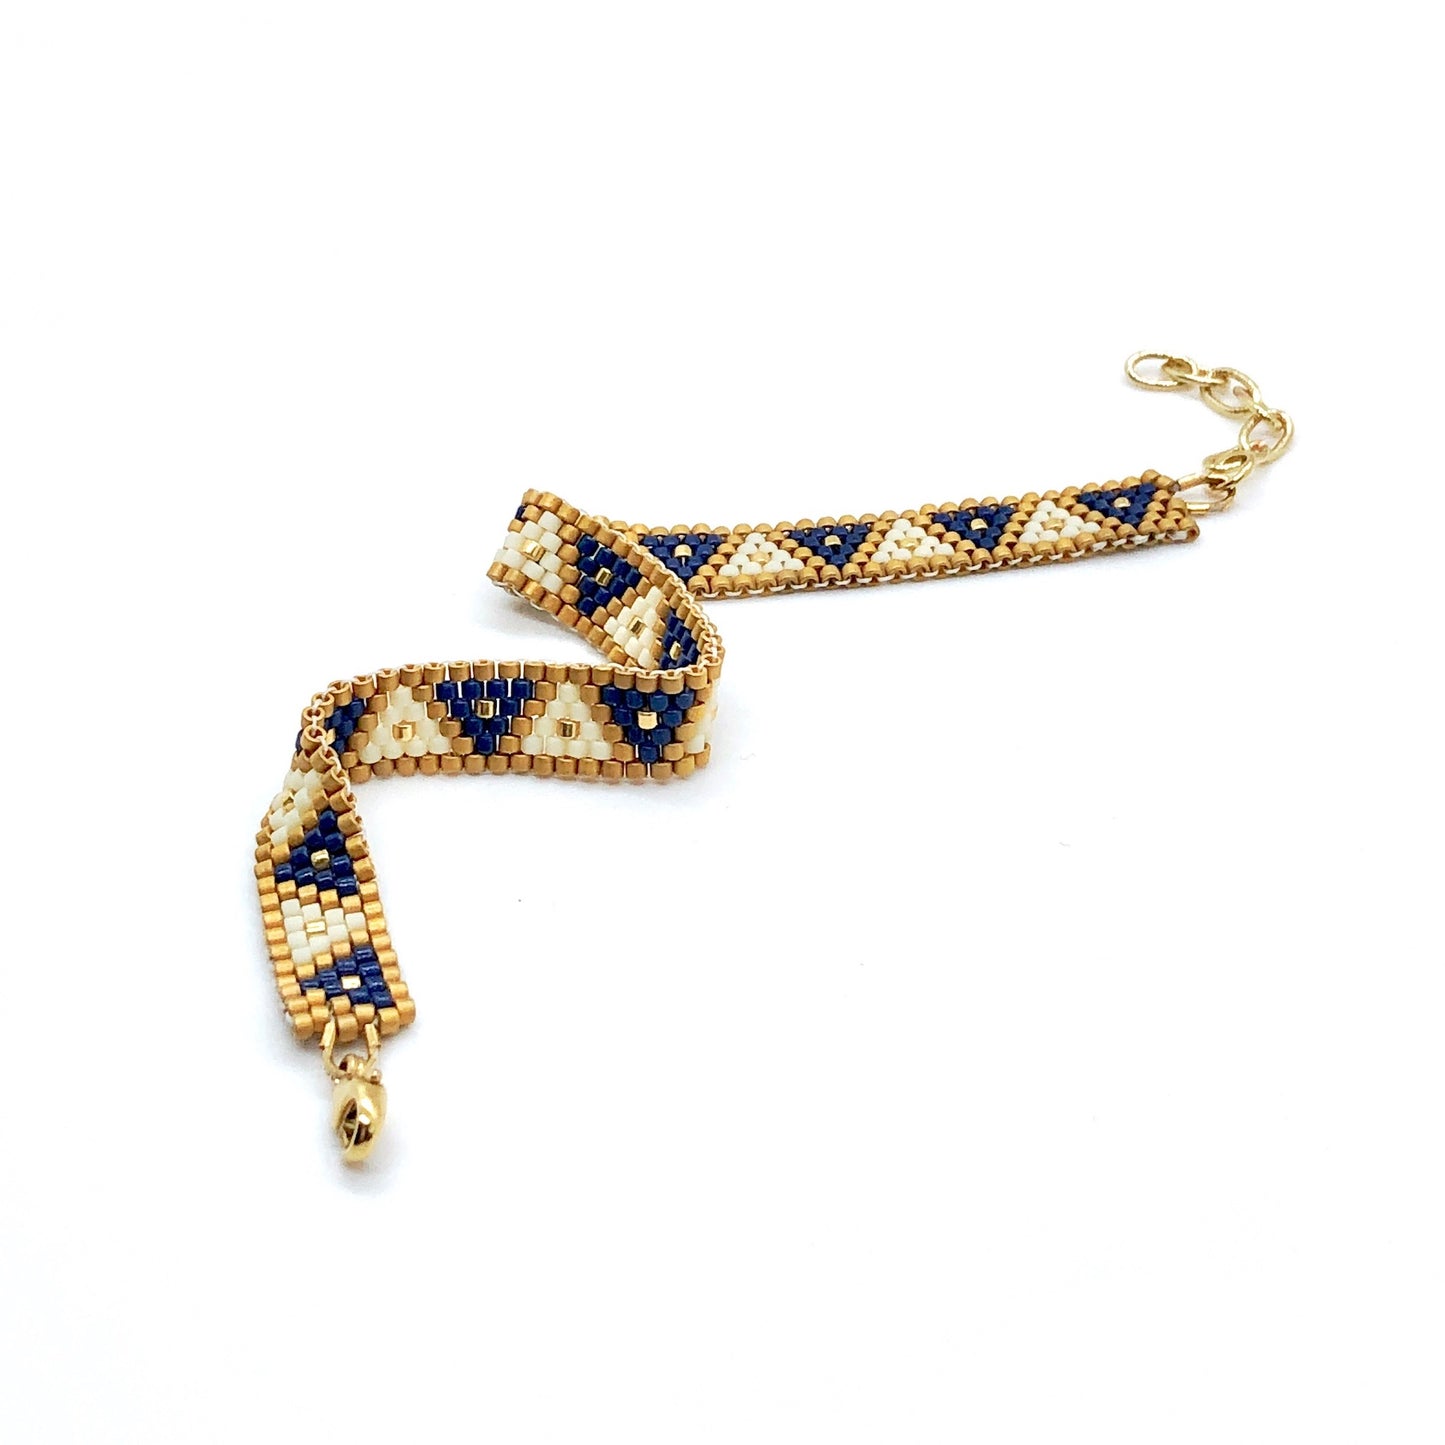 Peyote stitch woven triangle bracelet with blue, white, and gold beads.